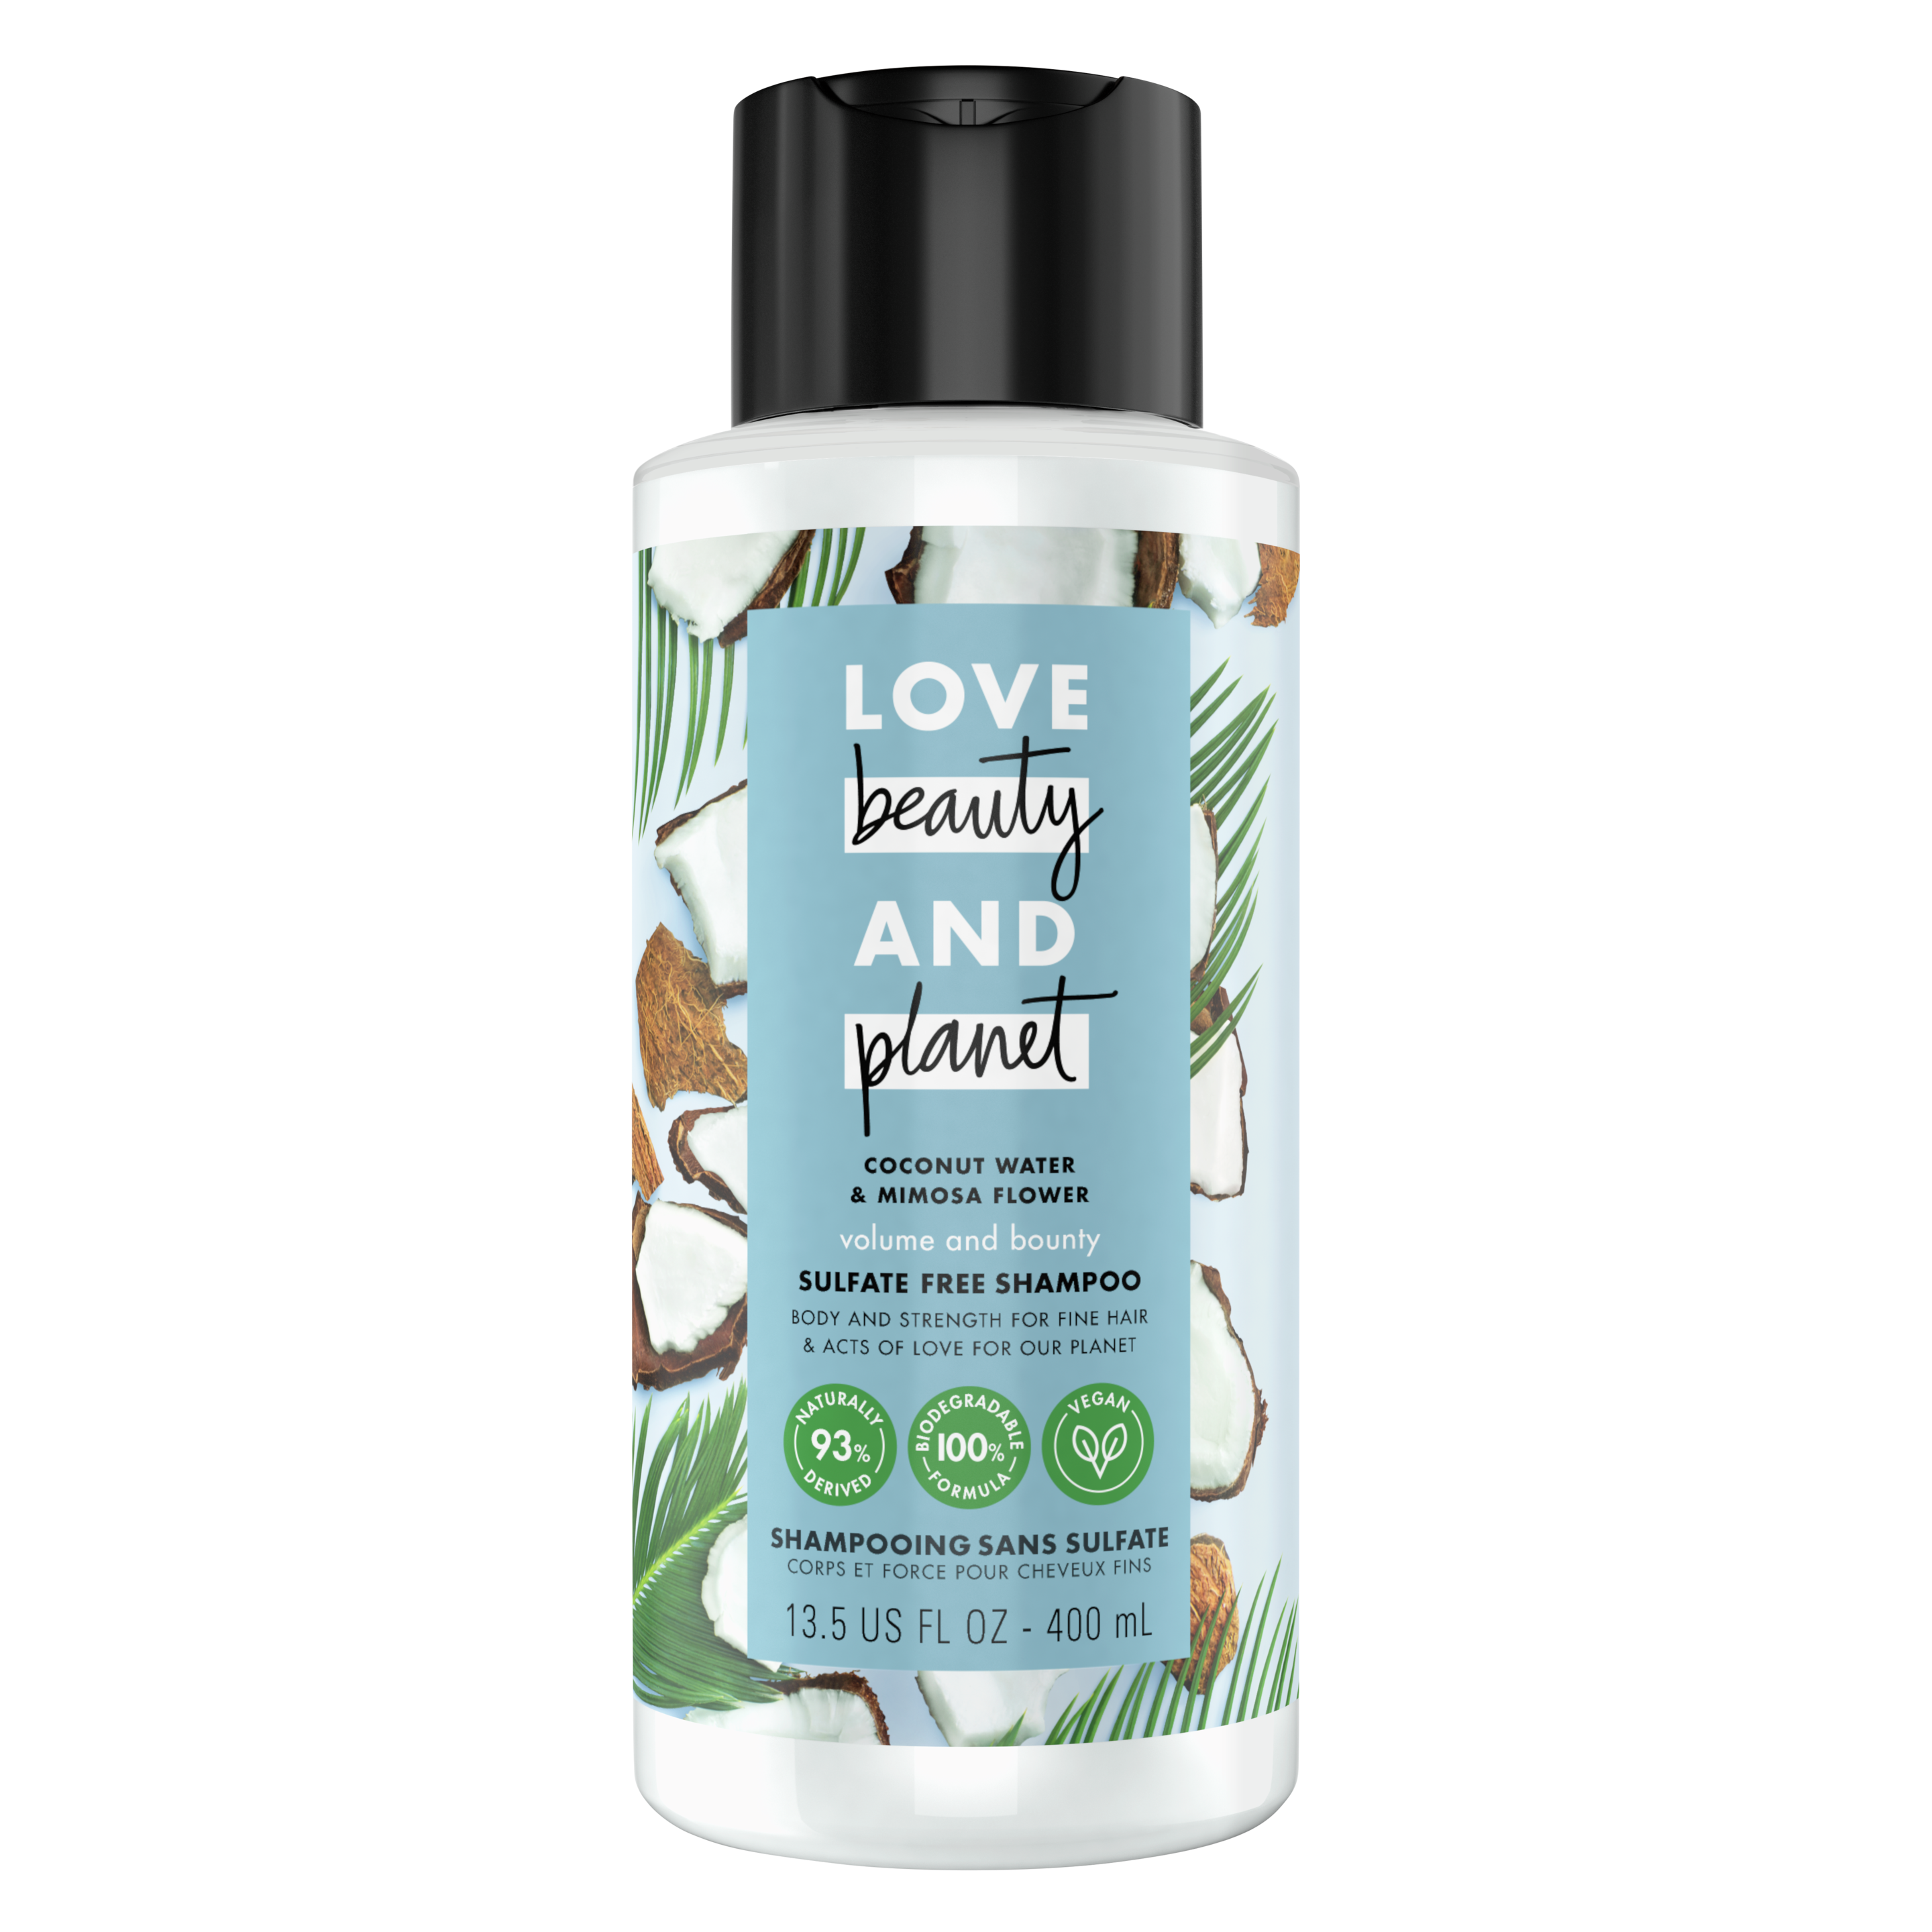 hybrid ordningen Pick up blade sulfate-free coconut water & mimosa flower shampoo | Love Beauty and Planet